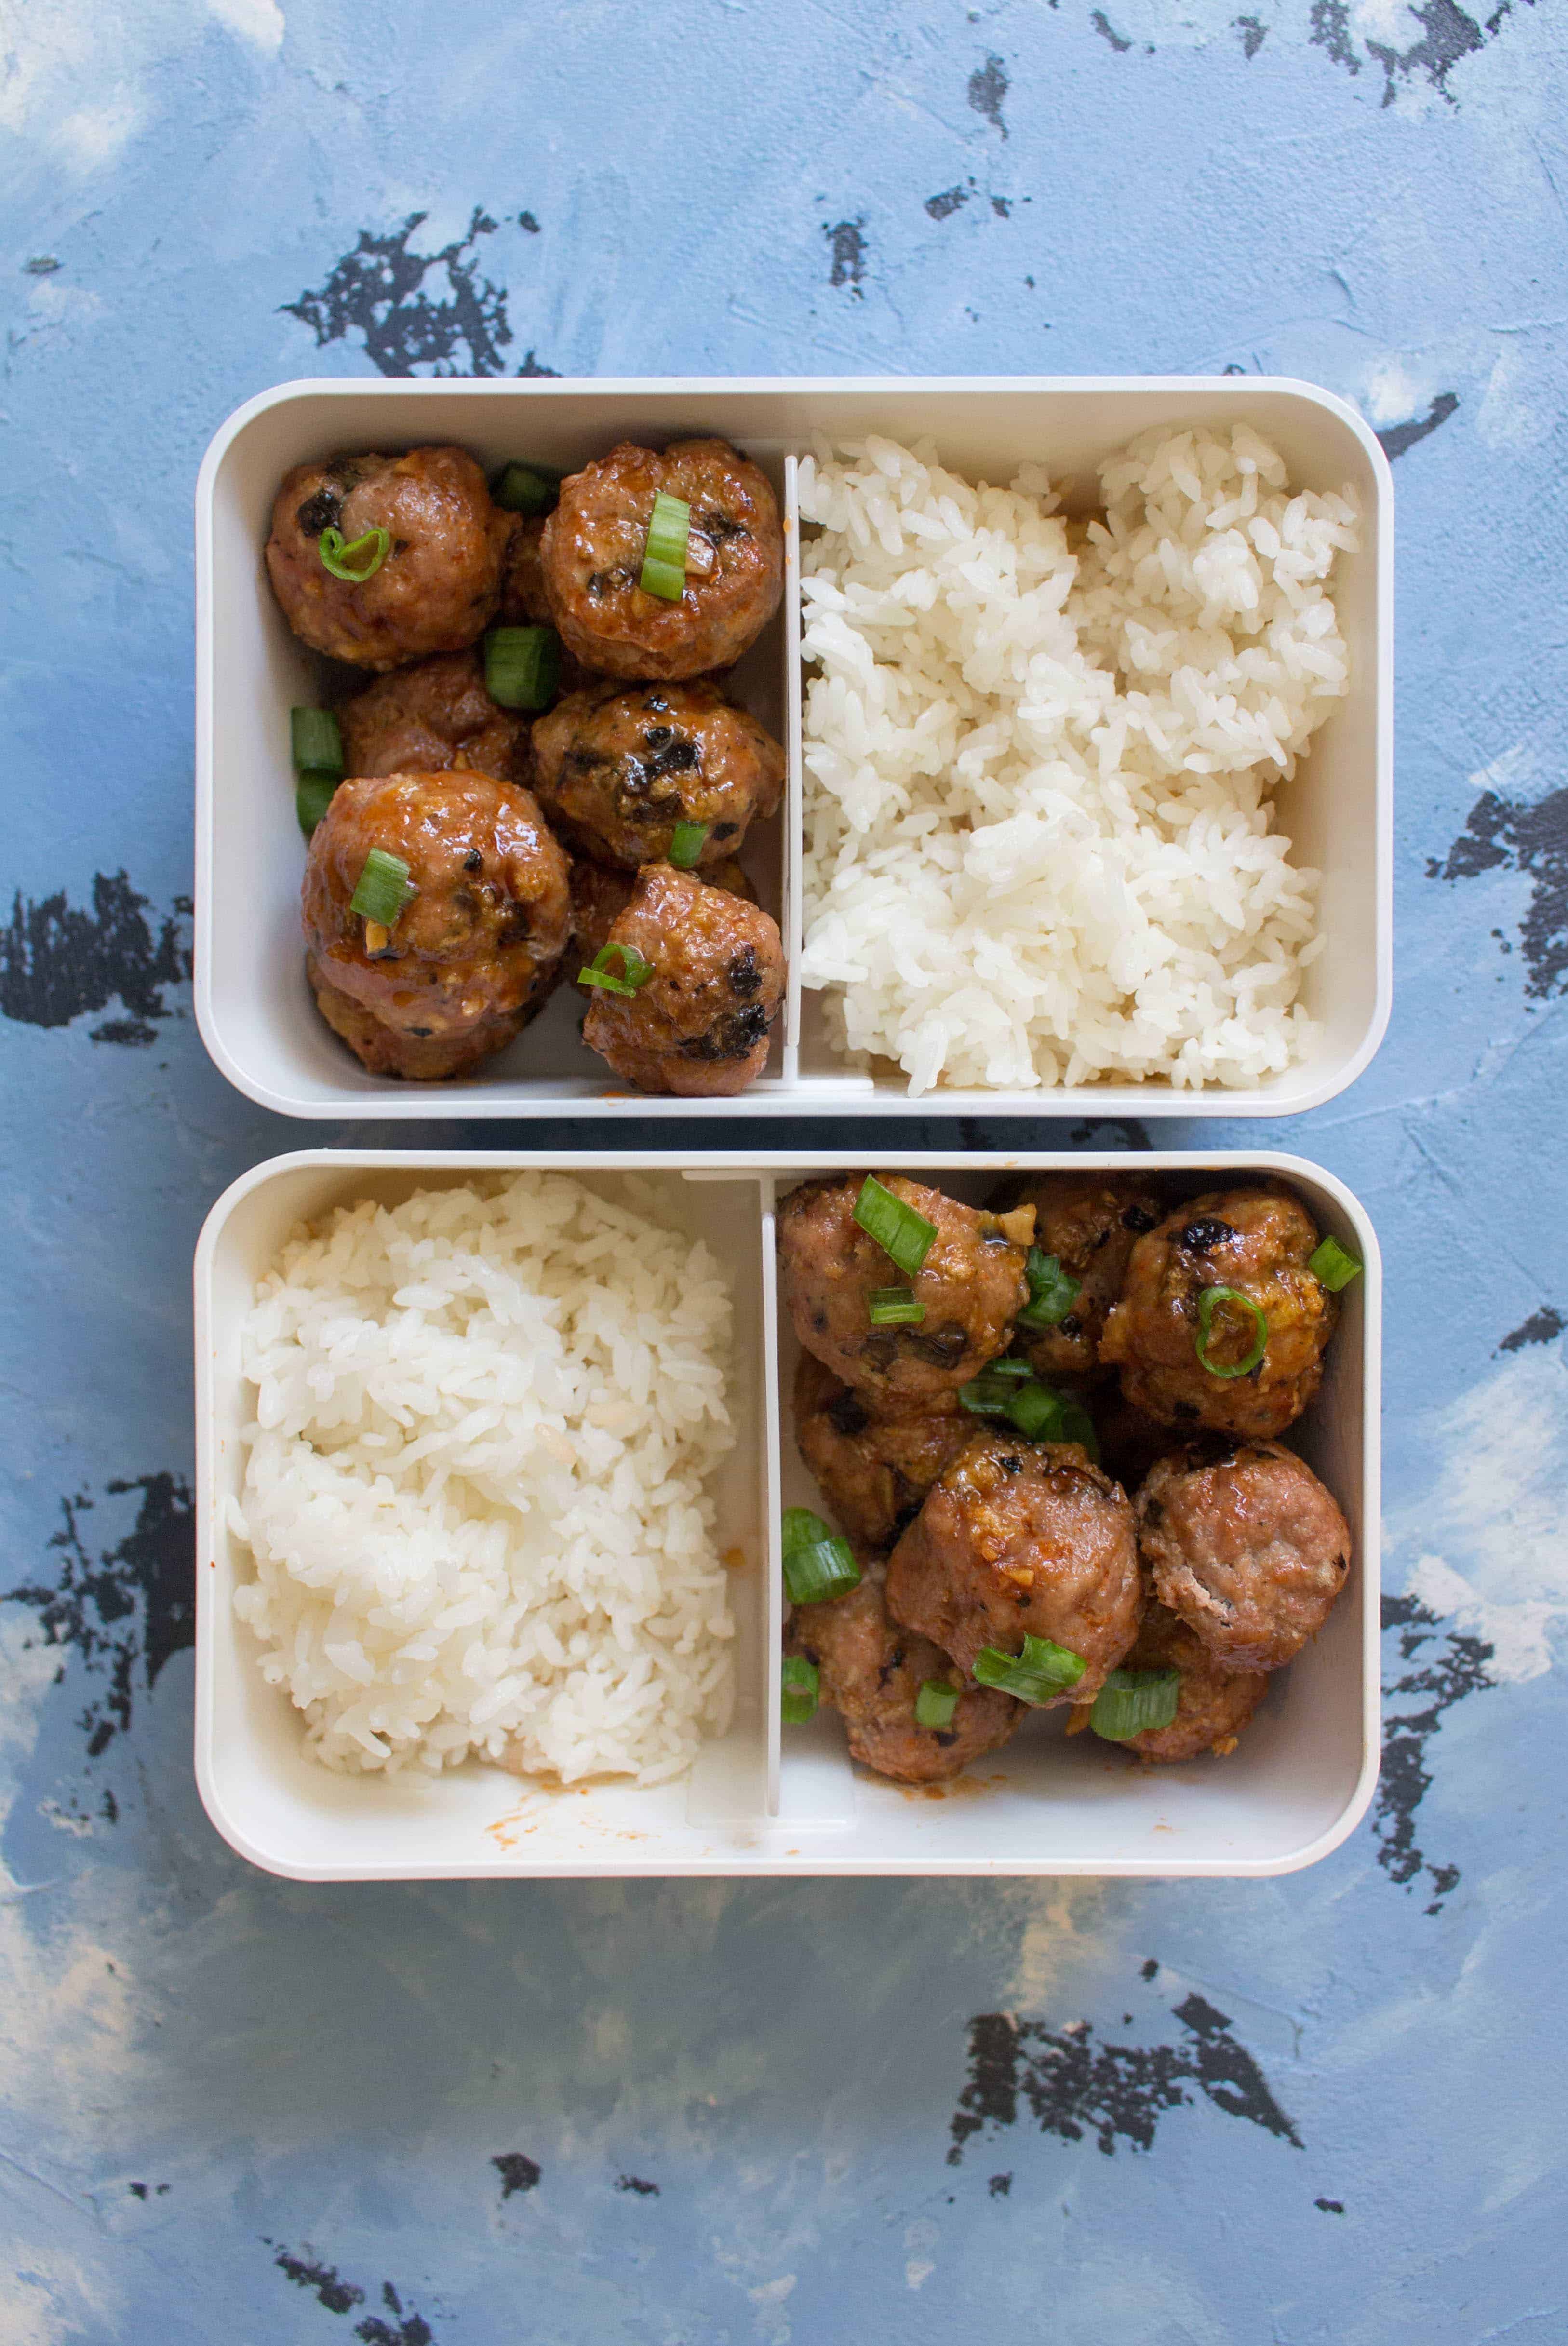 These Honey Sriracha Turkey and Mushroom Meatballs are the perfect blend of sweet and spicy that leaves you wanting more. These are perfect as an appetizer or as part of your weekly meal prep.